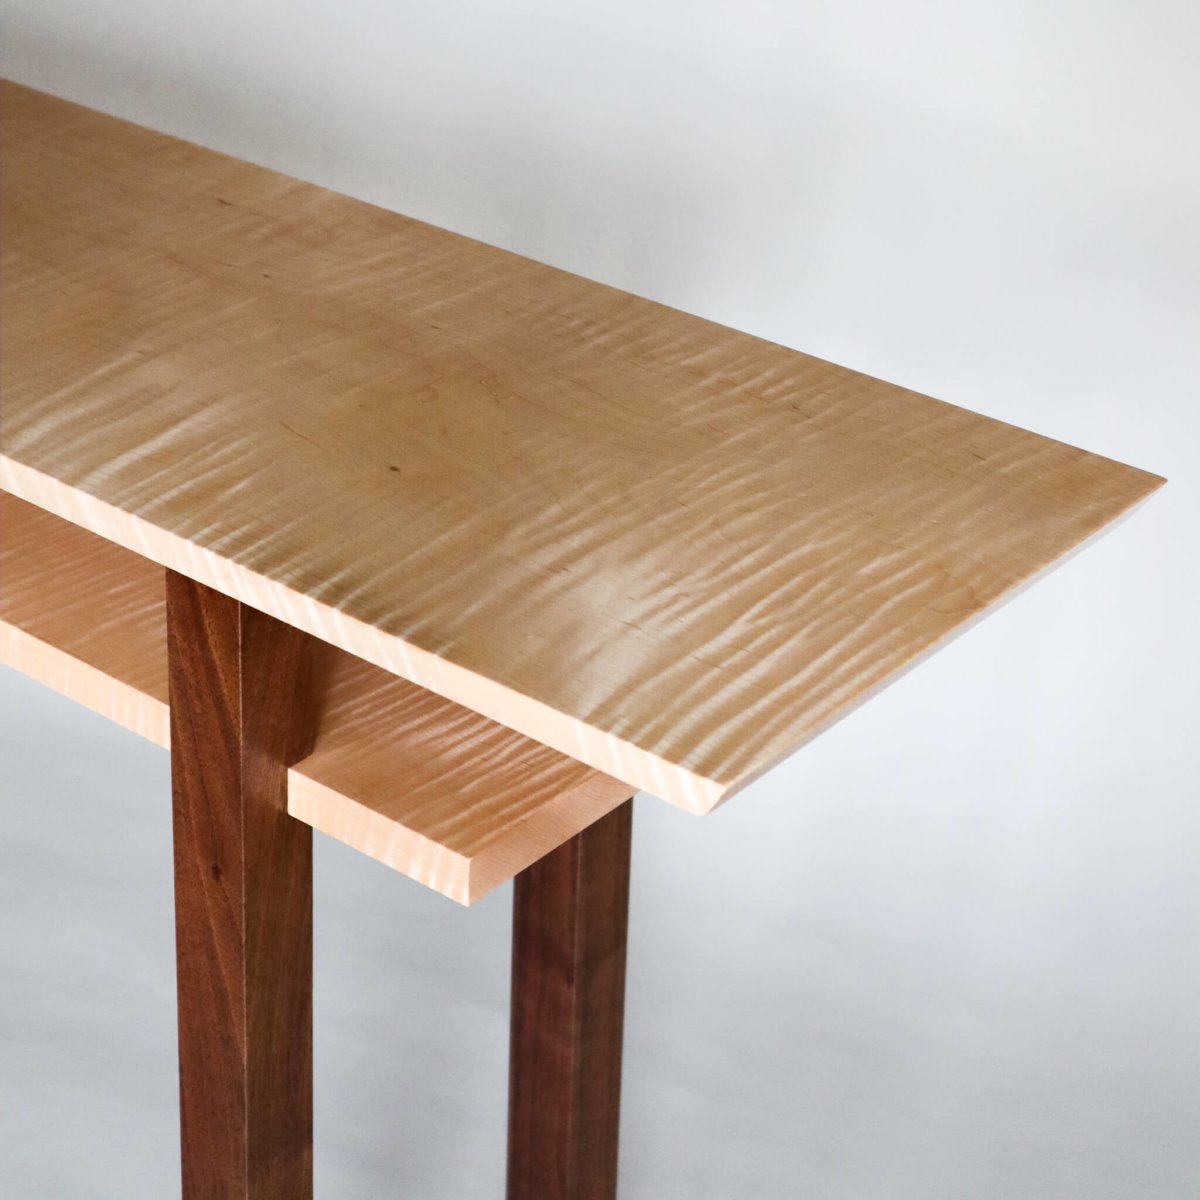 A unique console table hand-crafted from tiger maple wood with walnut table legs from Mokuzai Furniture